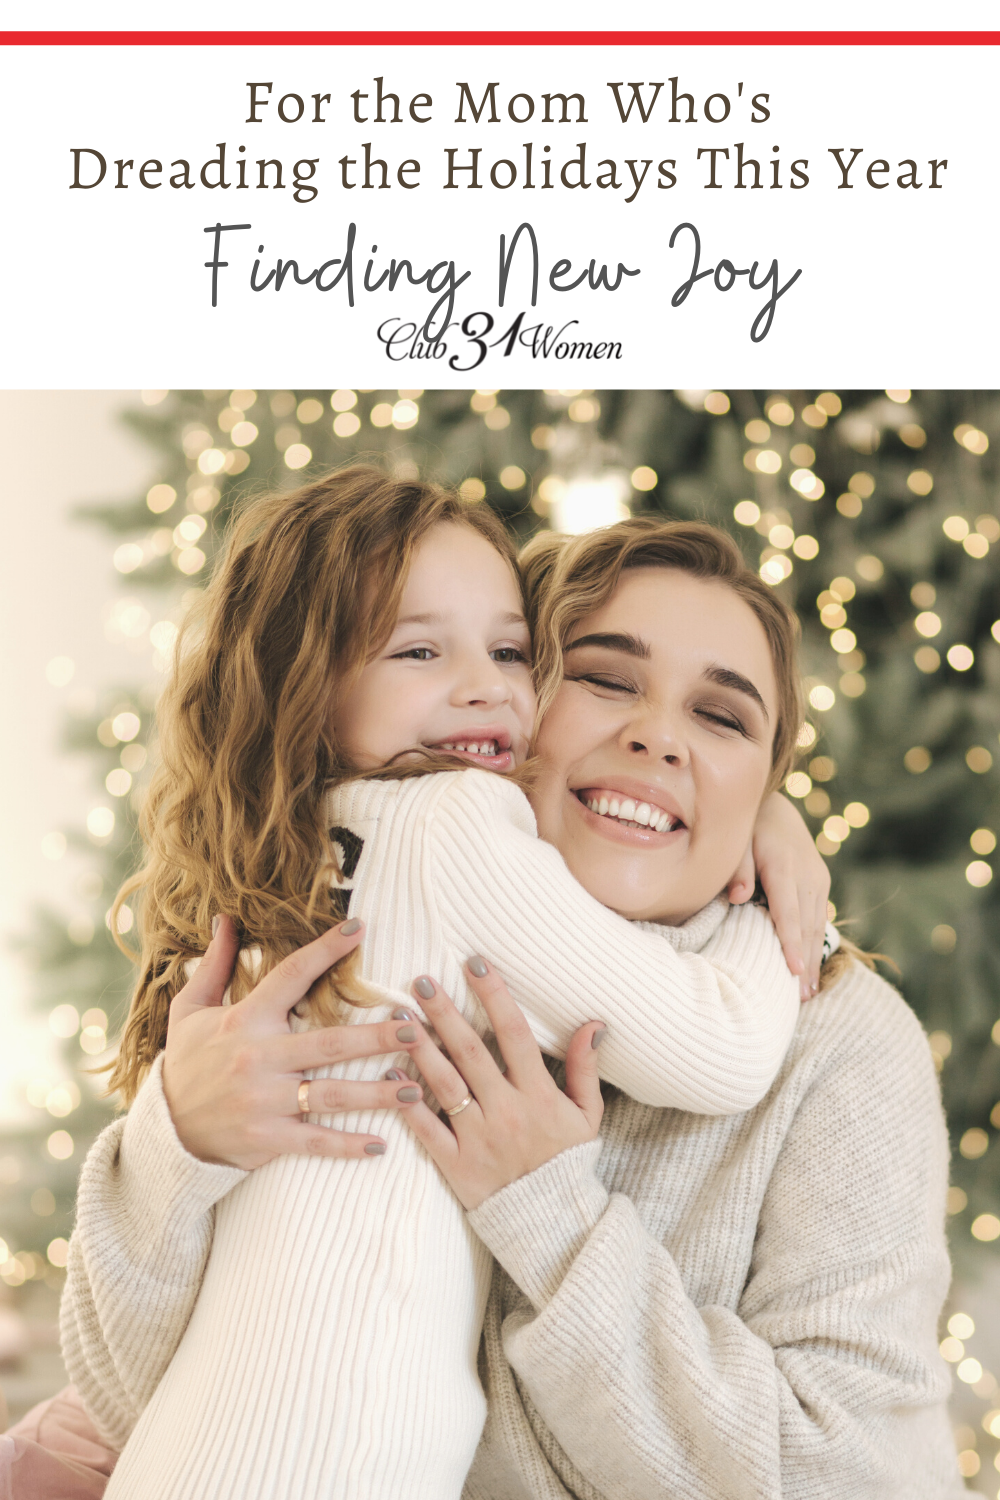 Are you dreading the holidays this year? Are you overwhelmed with all the expectations and fast pace of it? Here's how you can find new joy this Christmas! via @Club31Women